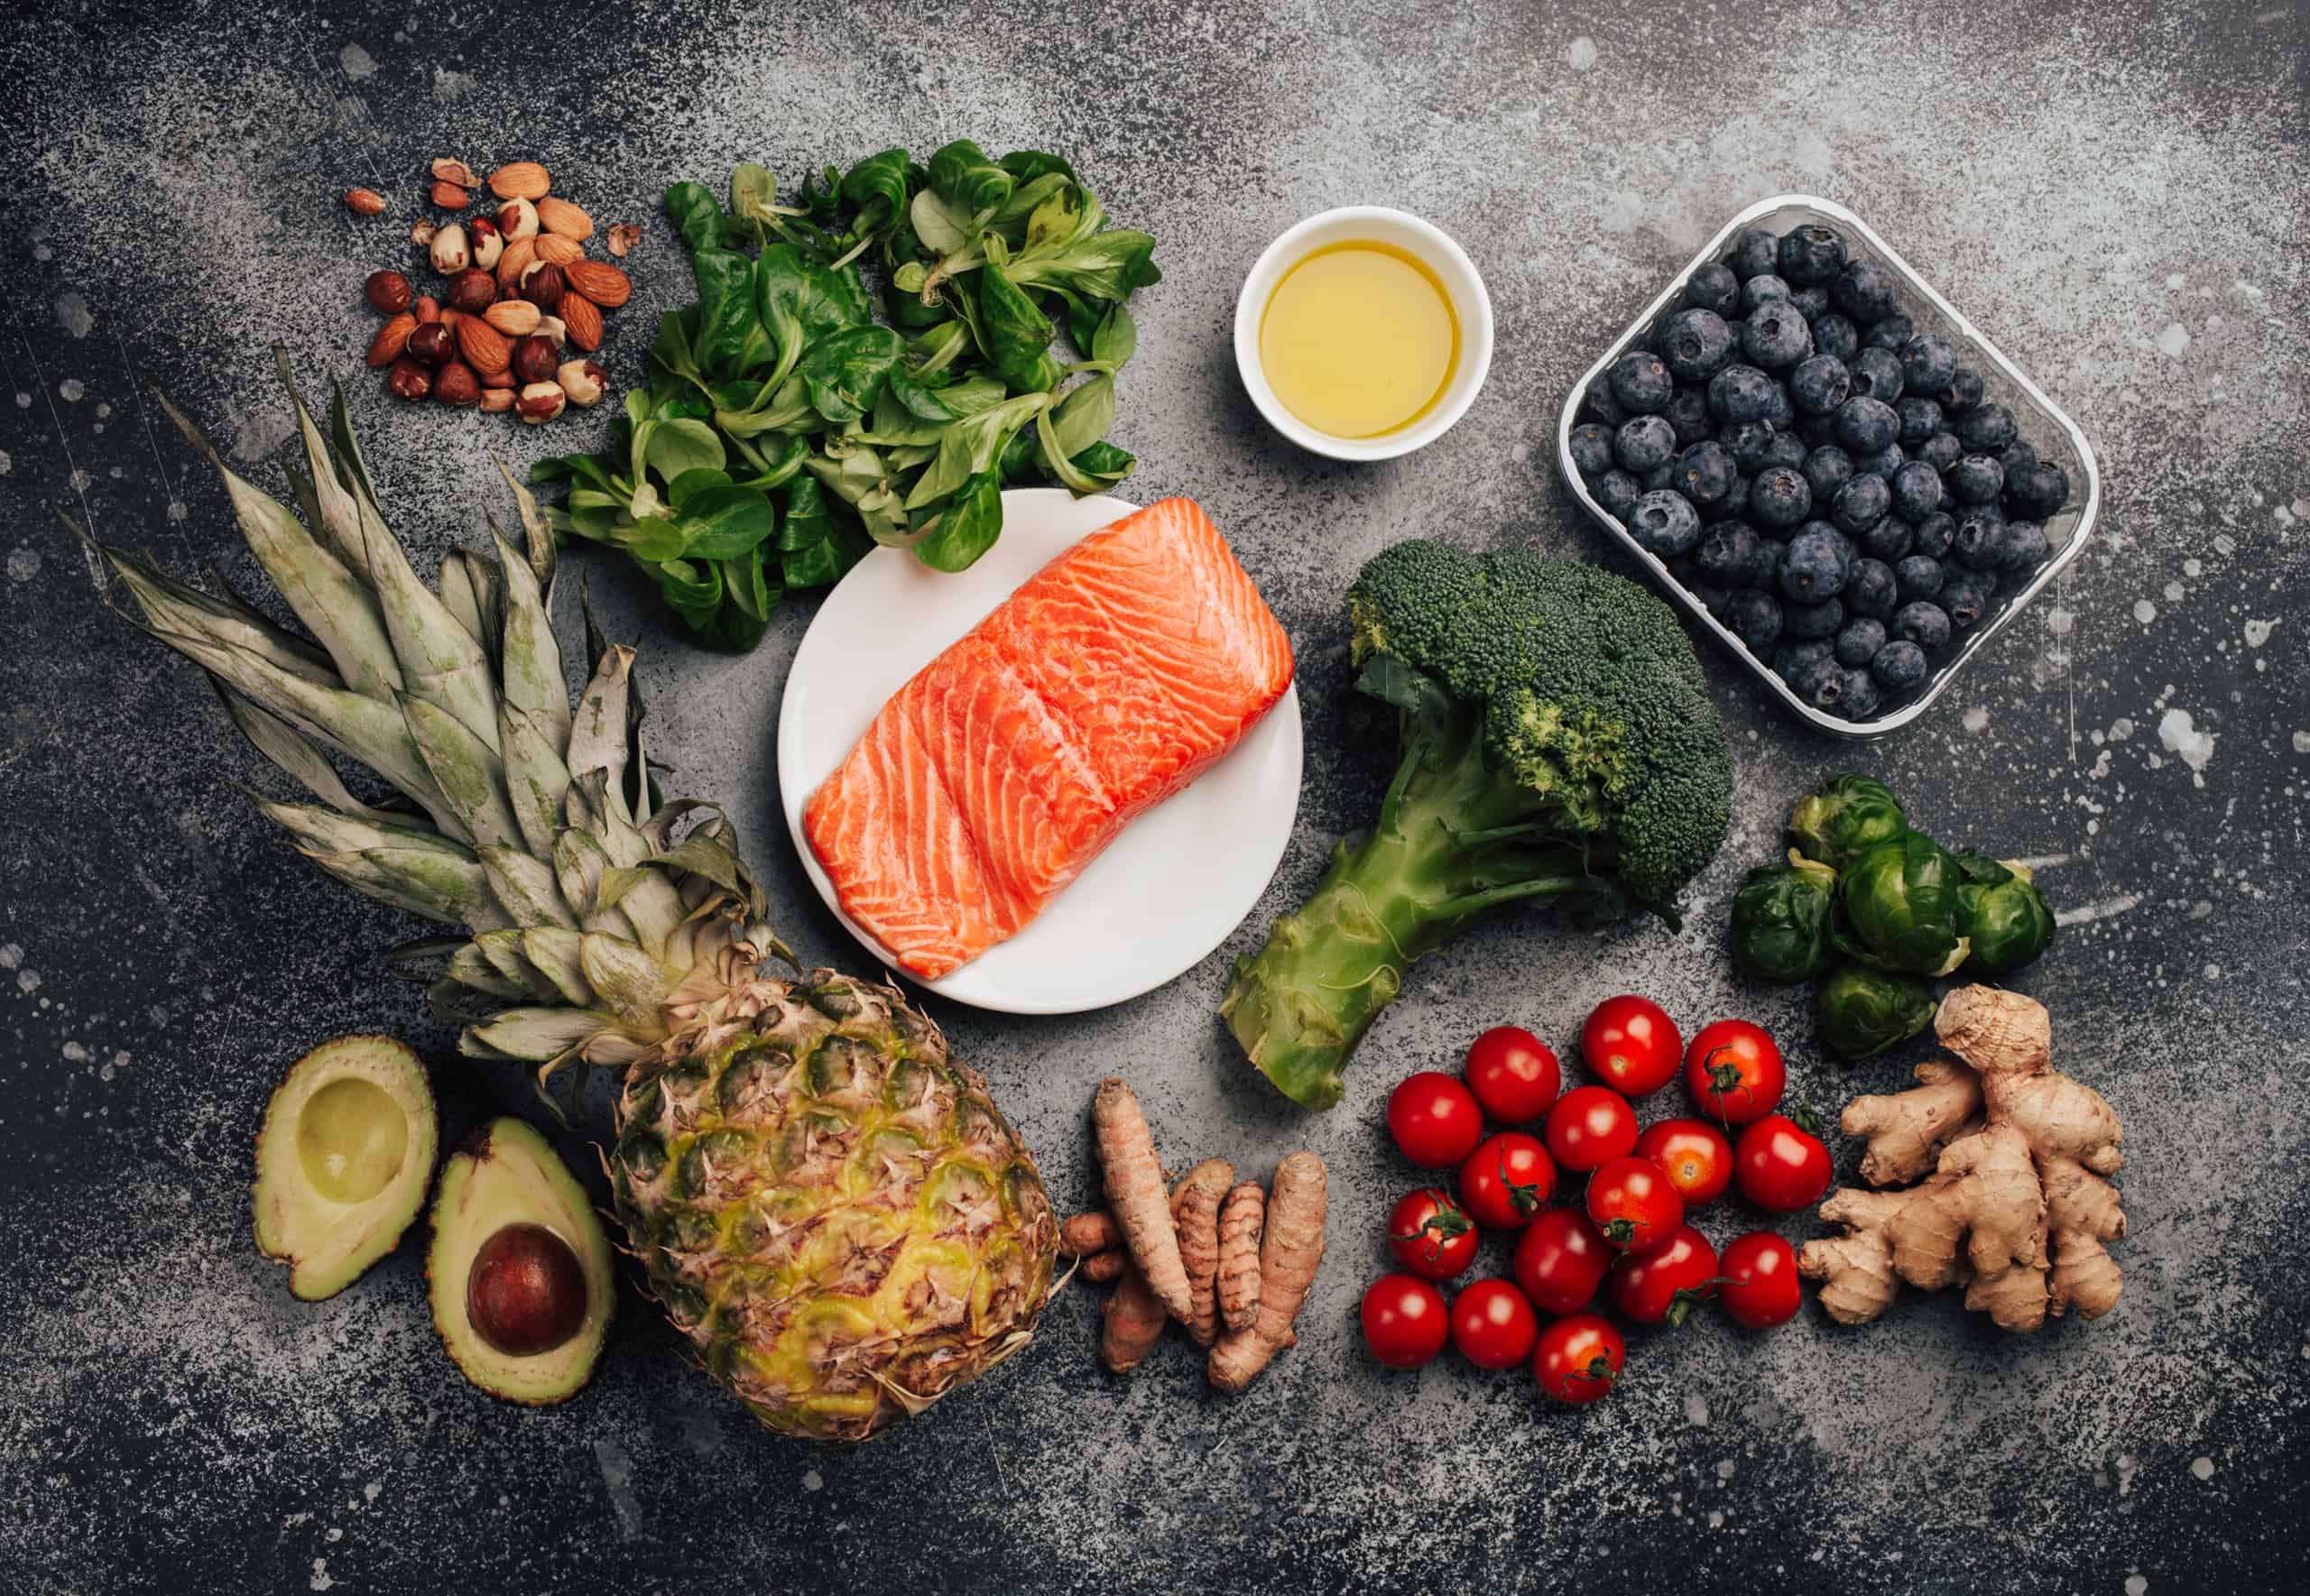 Fight Lower Back Pain: Nutrient-Rich Foods to Include in Your Diet